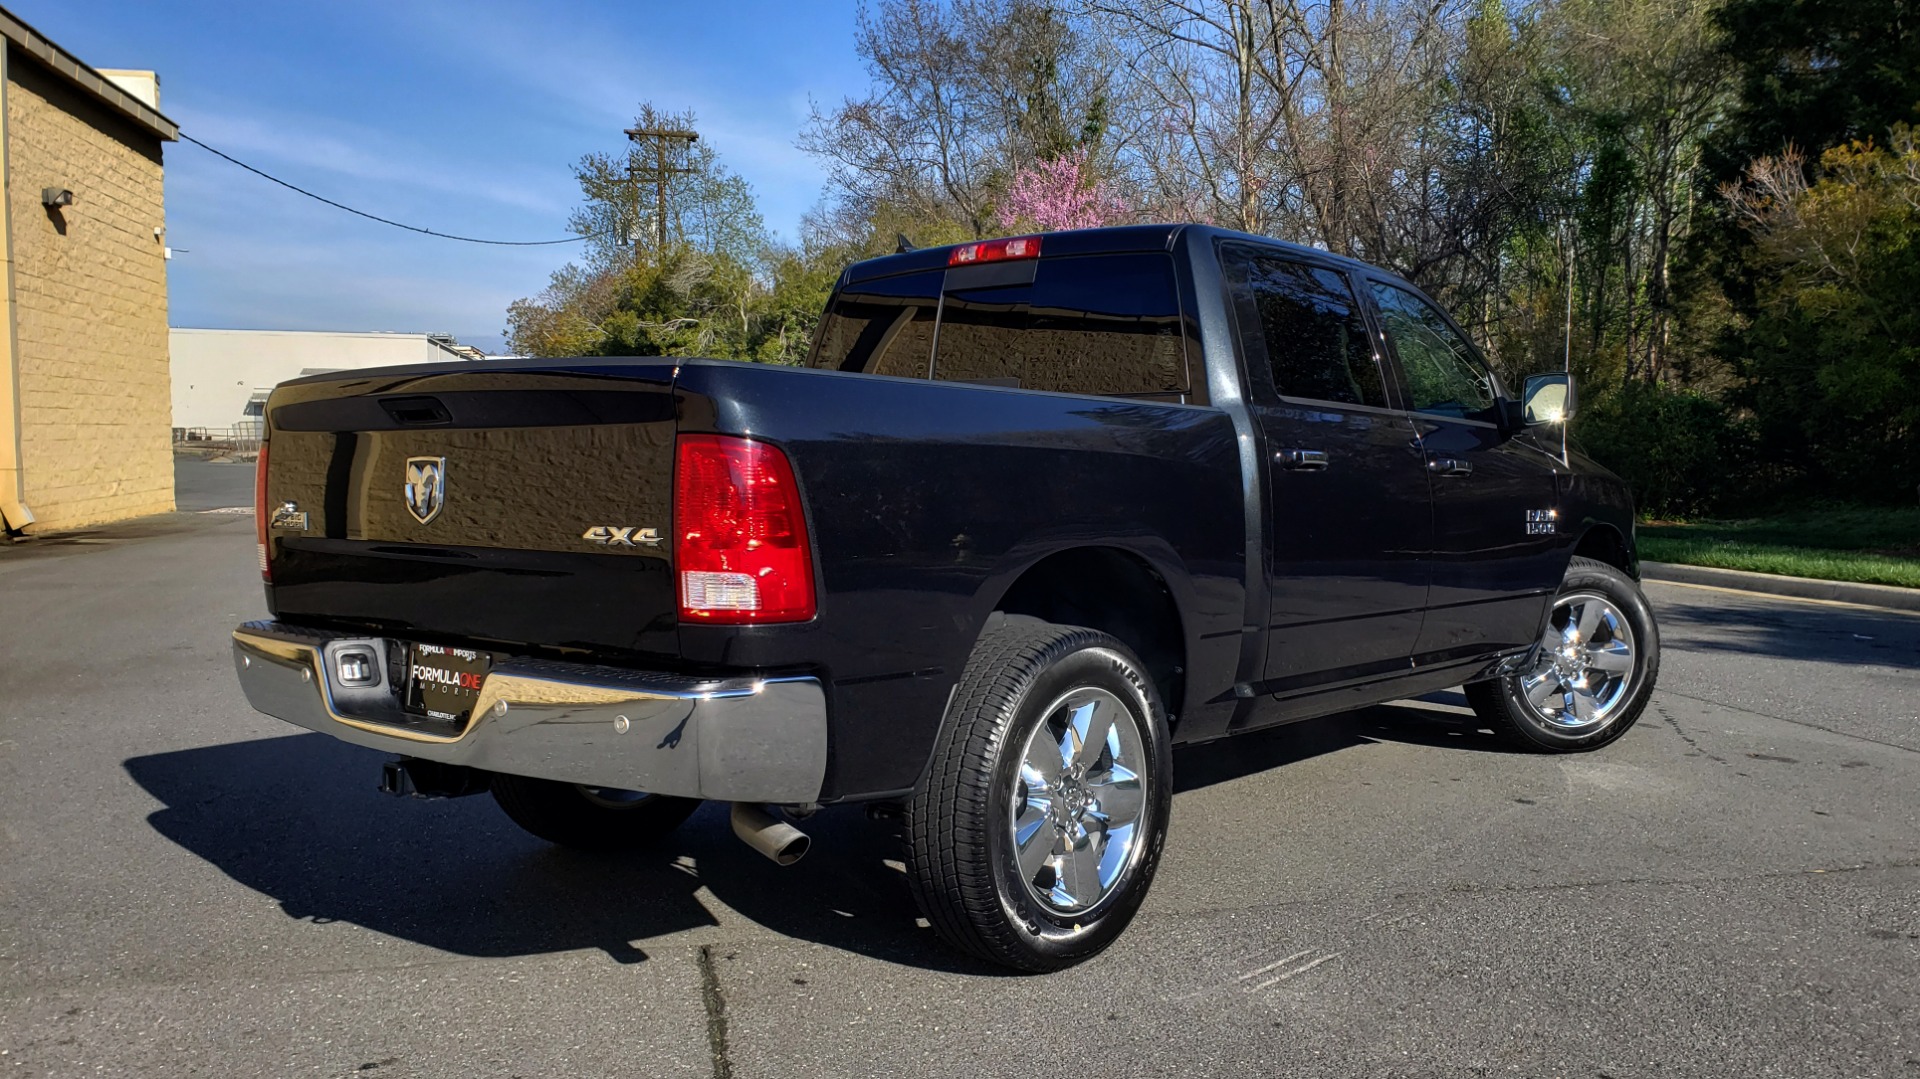 Used 2017 Ram 1500 BIG HORN CREW CAB 4X4 / 3.6L V6 / 8-SPD AUTO / WIFI HOTSPOT for sale Sold at Formula Imports in Charlotte NC 28227 6